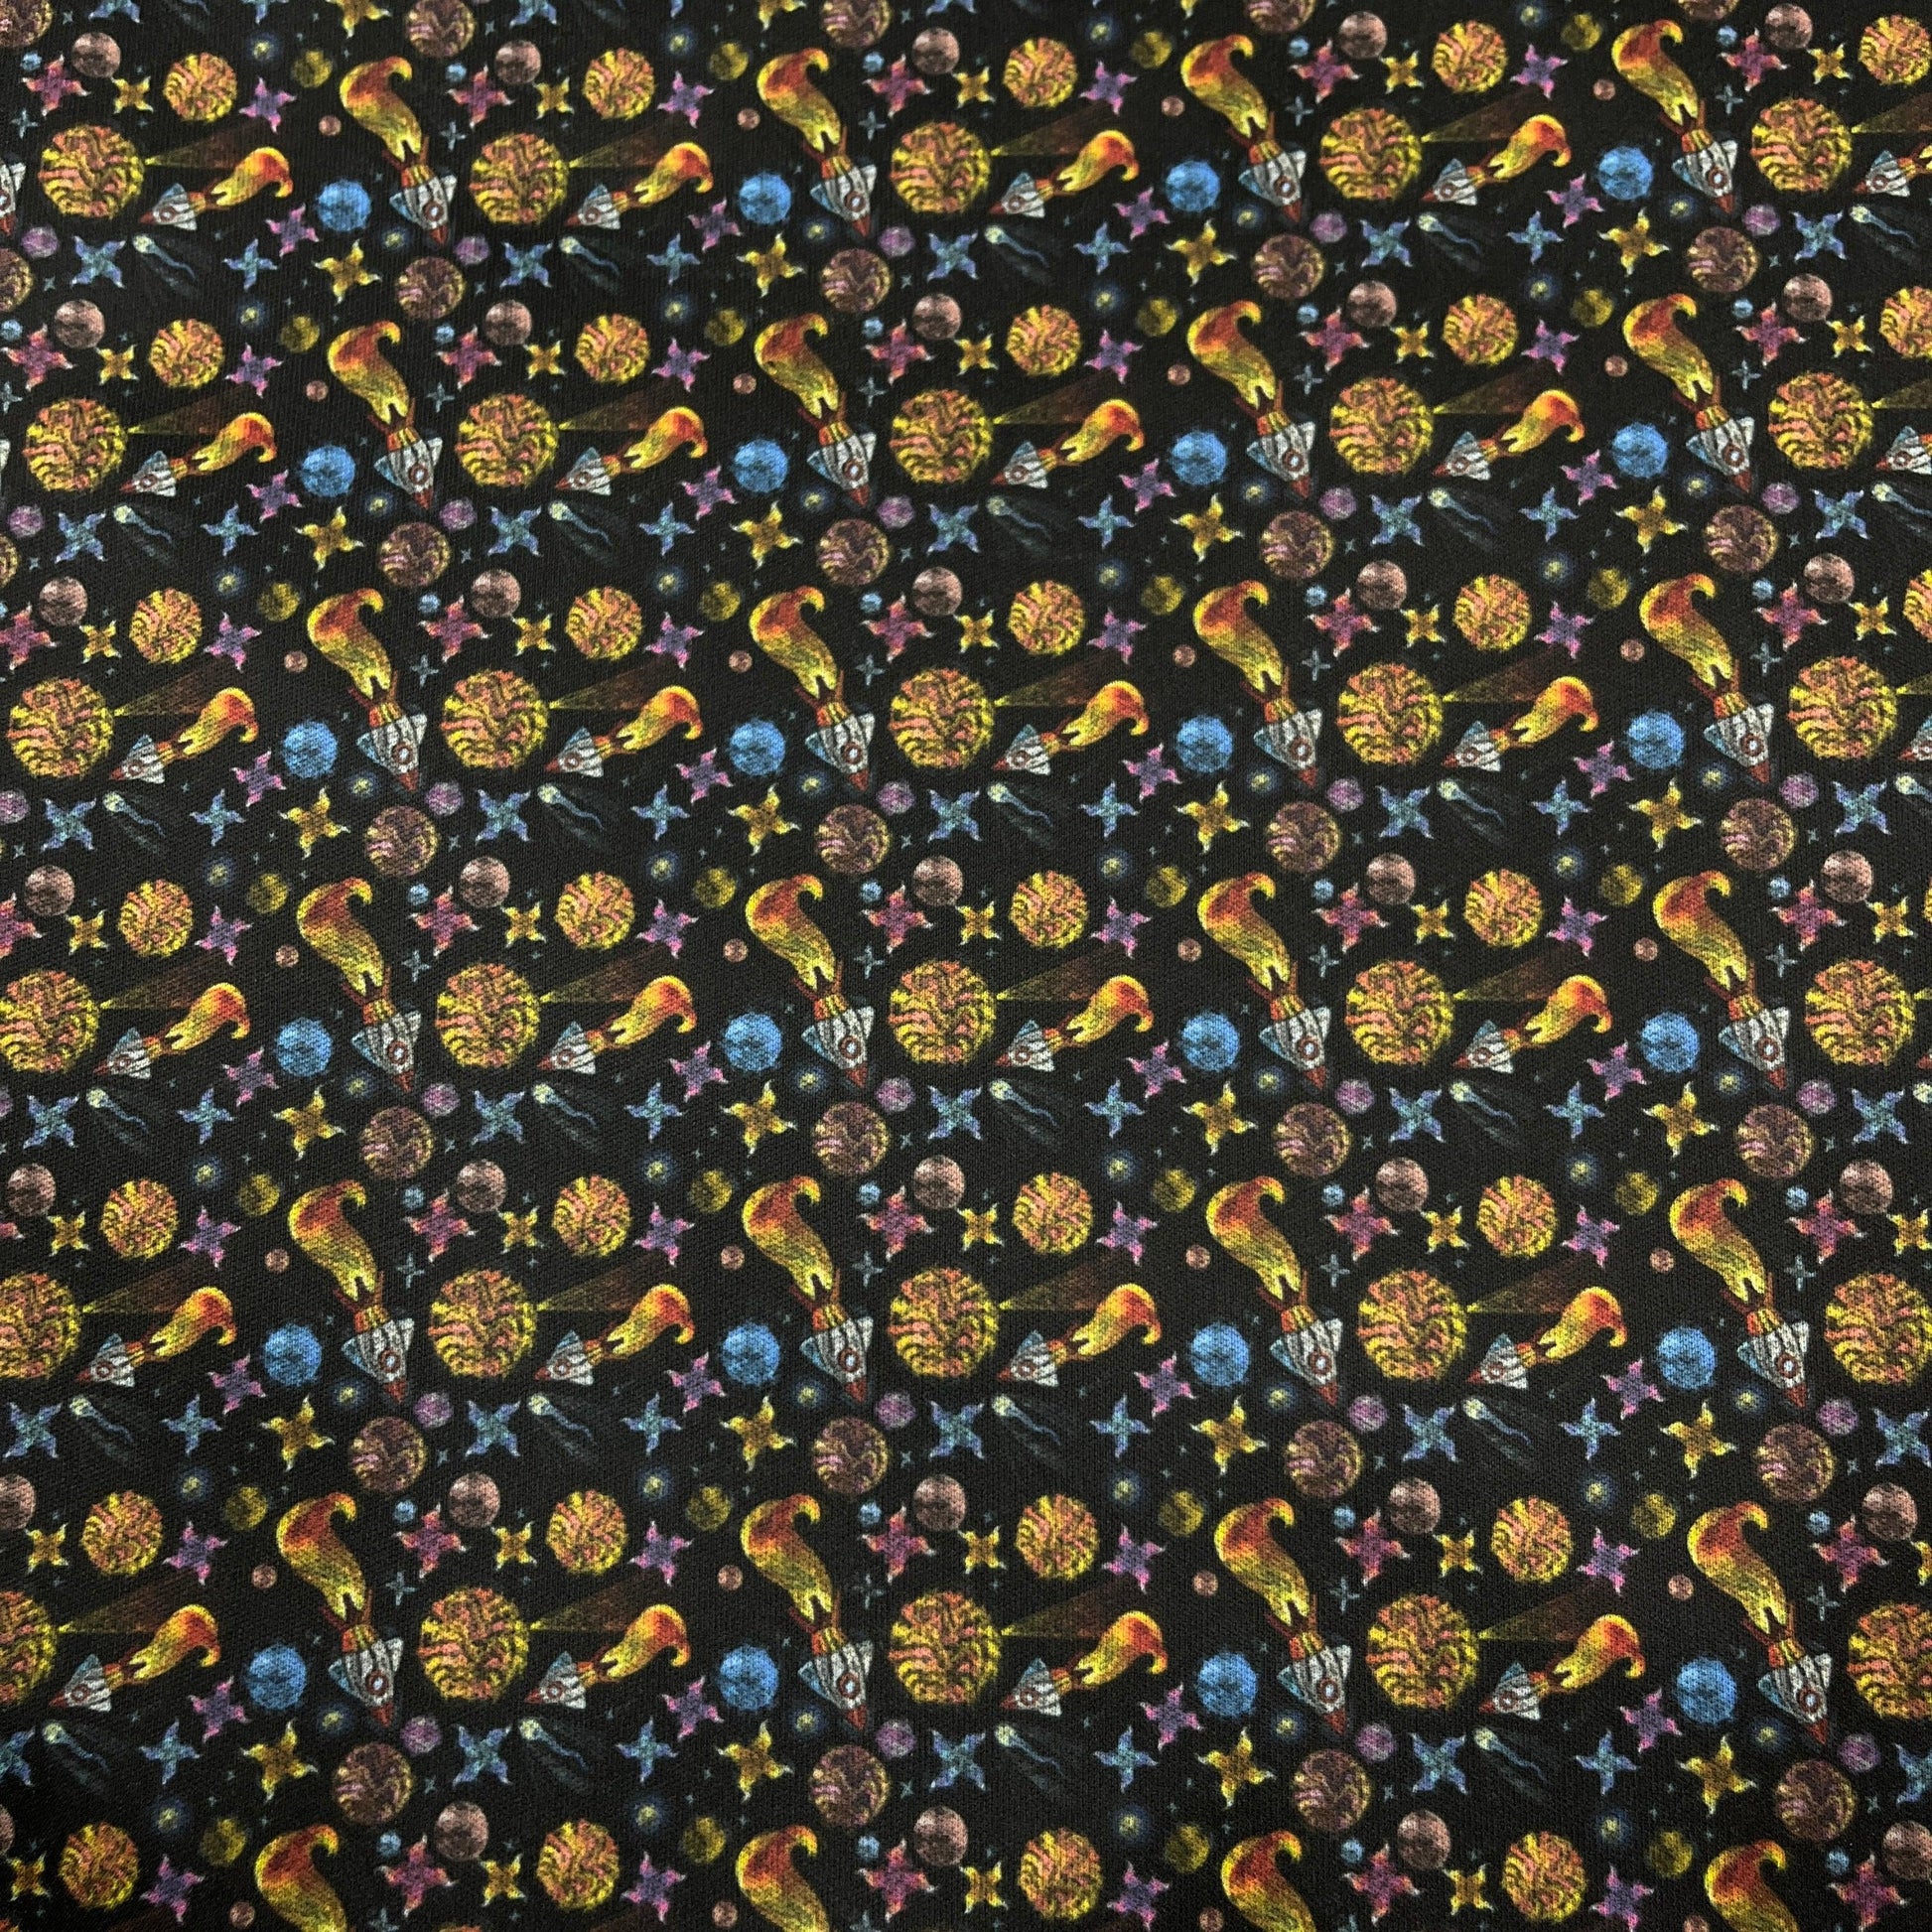 Embroidered Space 1 mil PUL Fabric - Made in the USA - Nature's Fabrics